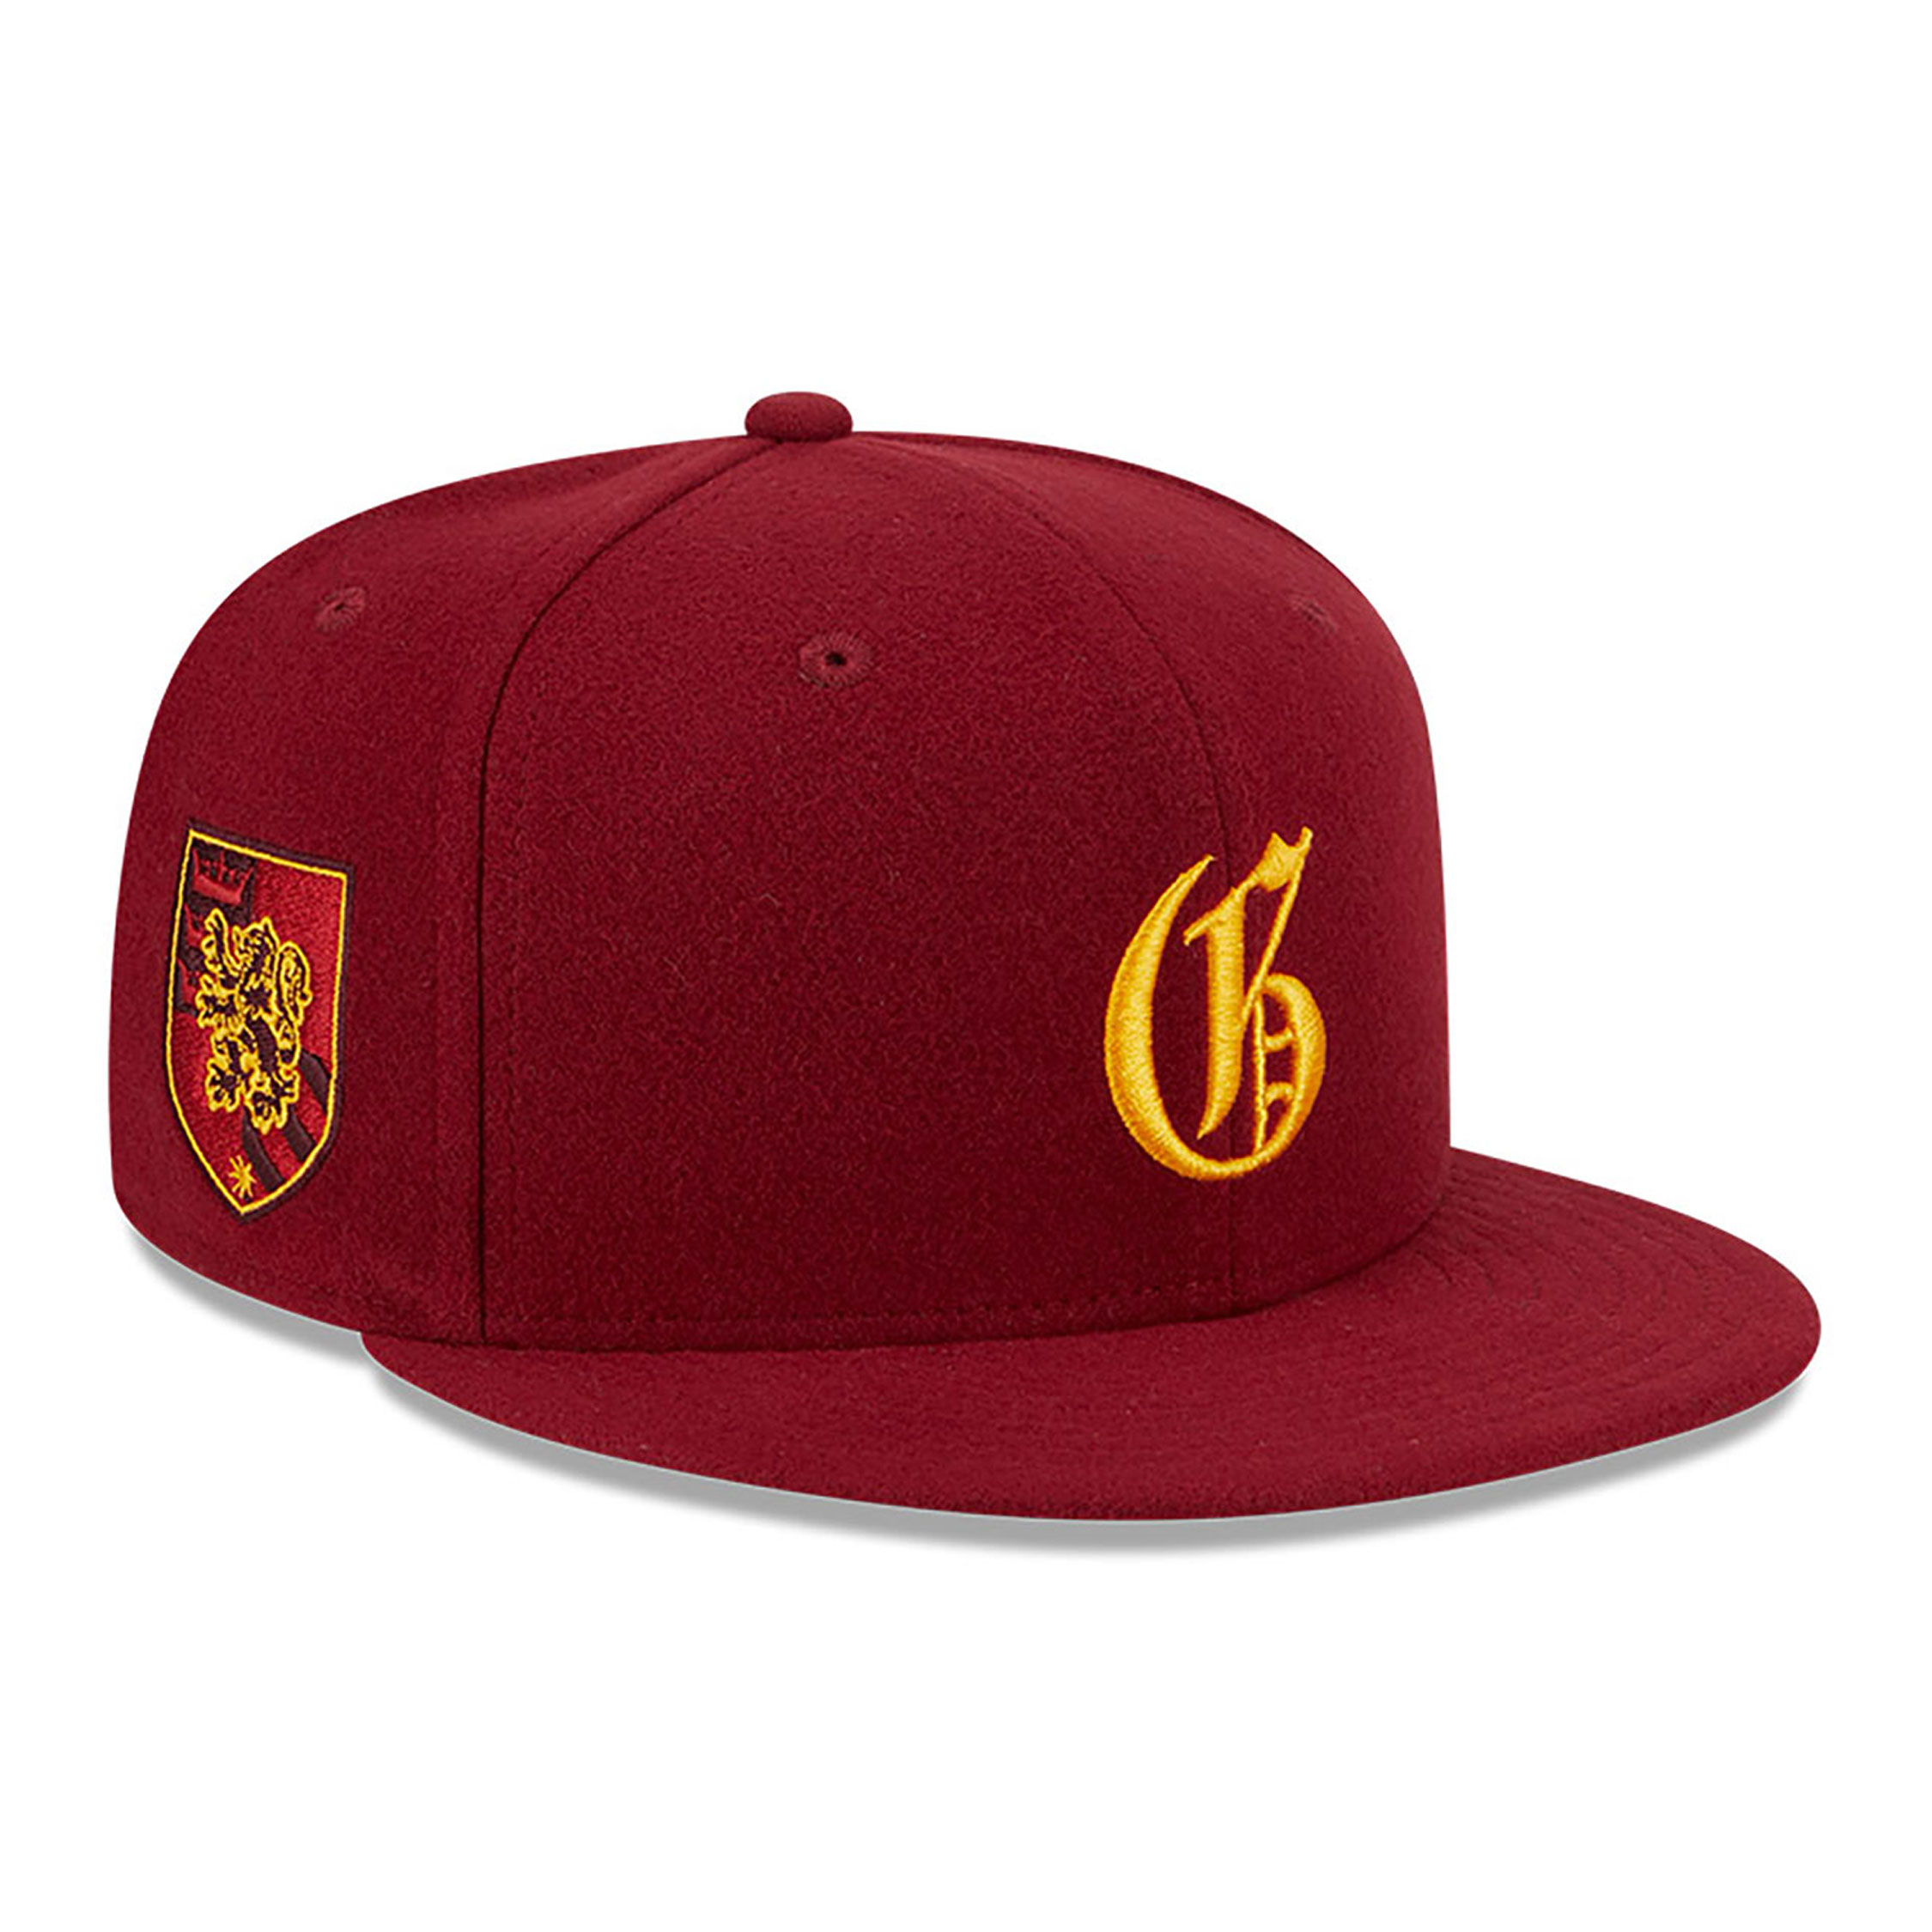 Harry Potter and the Deathly Hallows Part 2 Gryffindor Dark Red 9FIFTY Snapback Cap